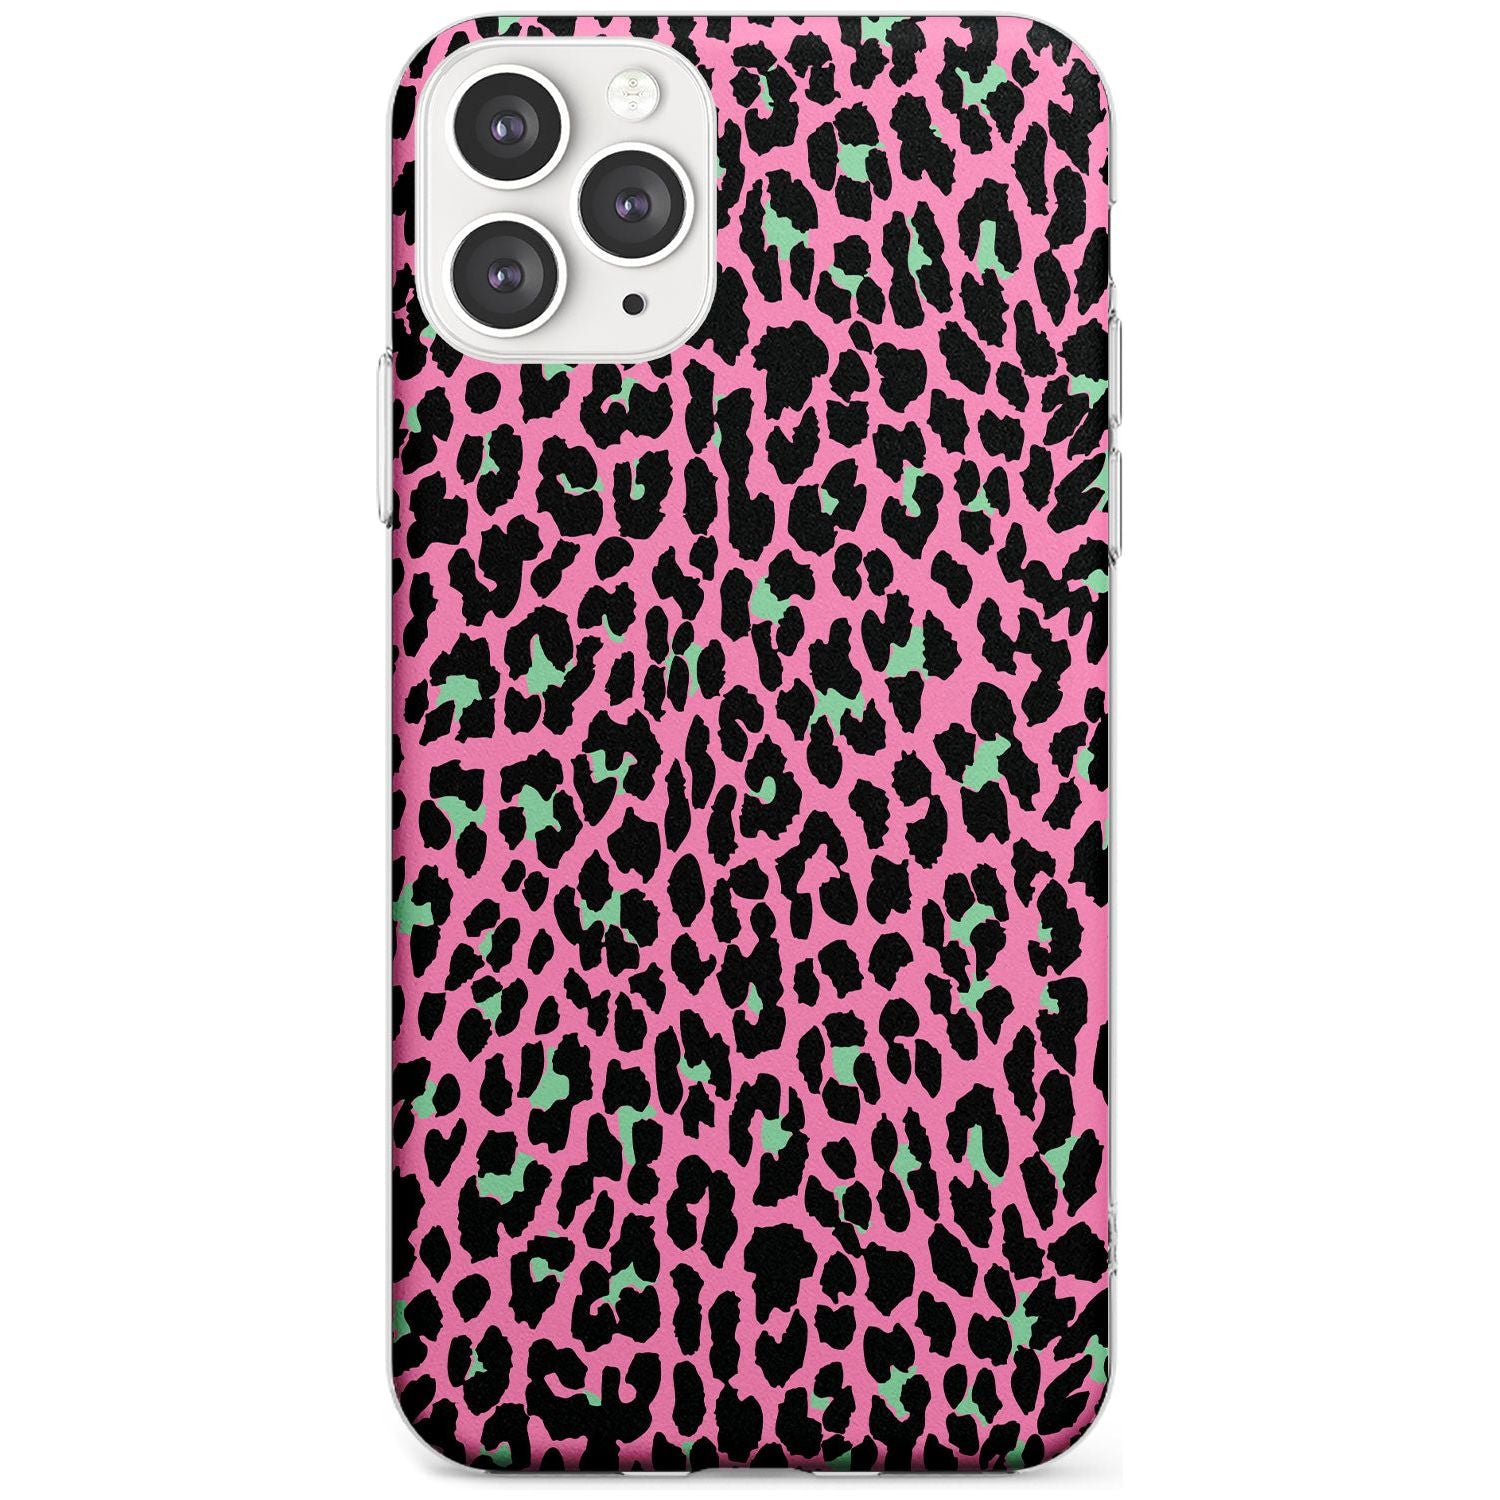 Green on Pink Leopard Print Pattern Slim TPU Phone Case for iPhone 11 Pro Max